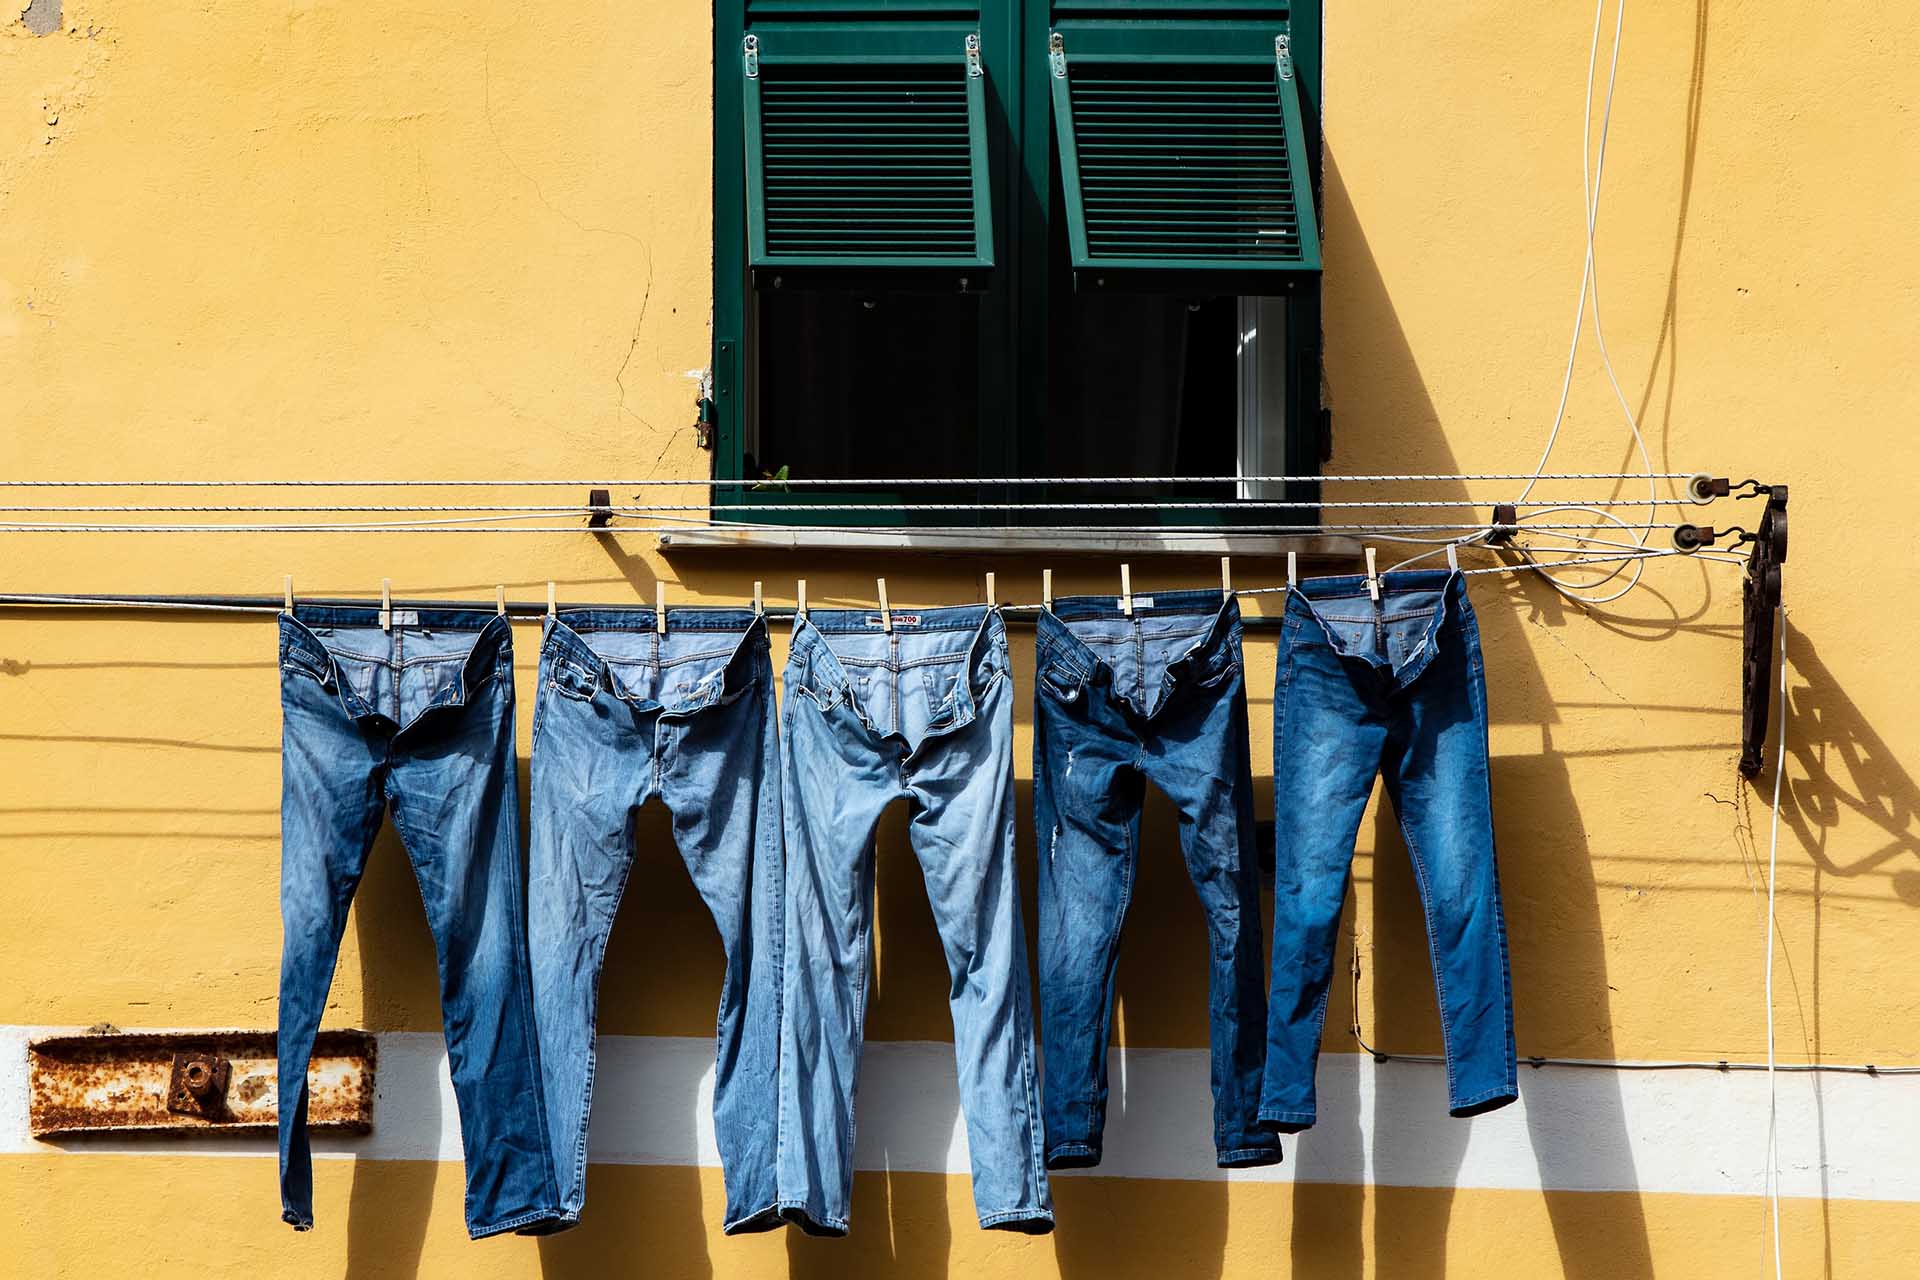 Jeans hanging from a string outside a window.